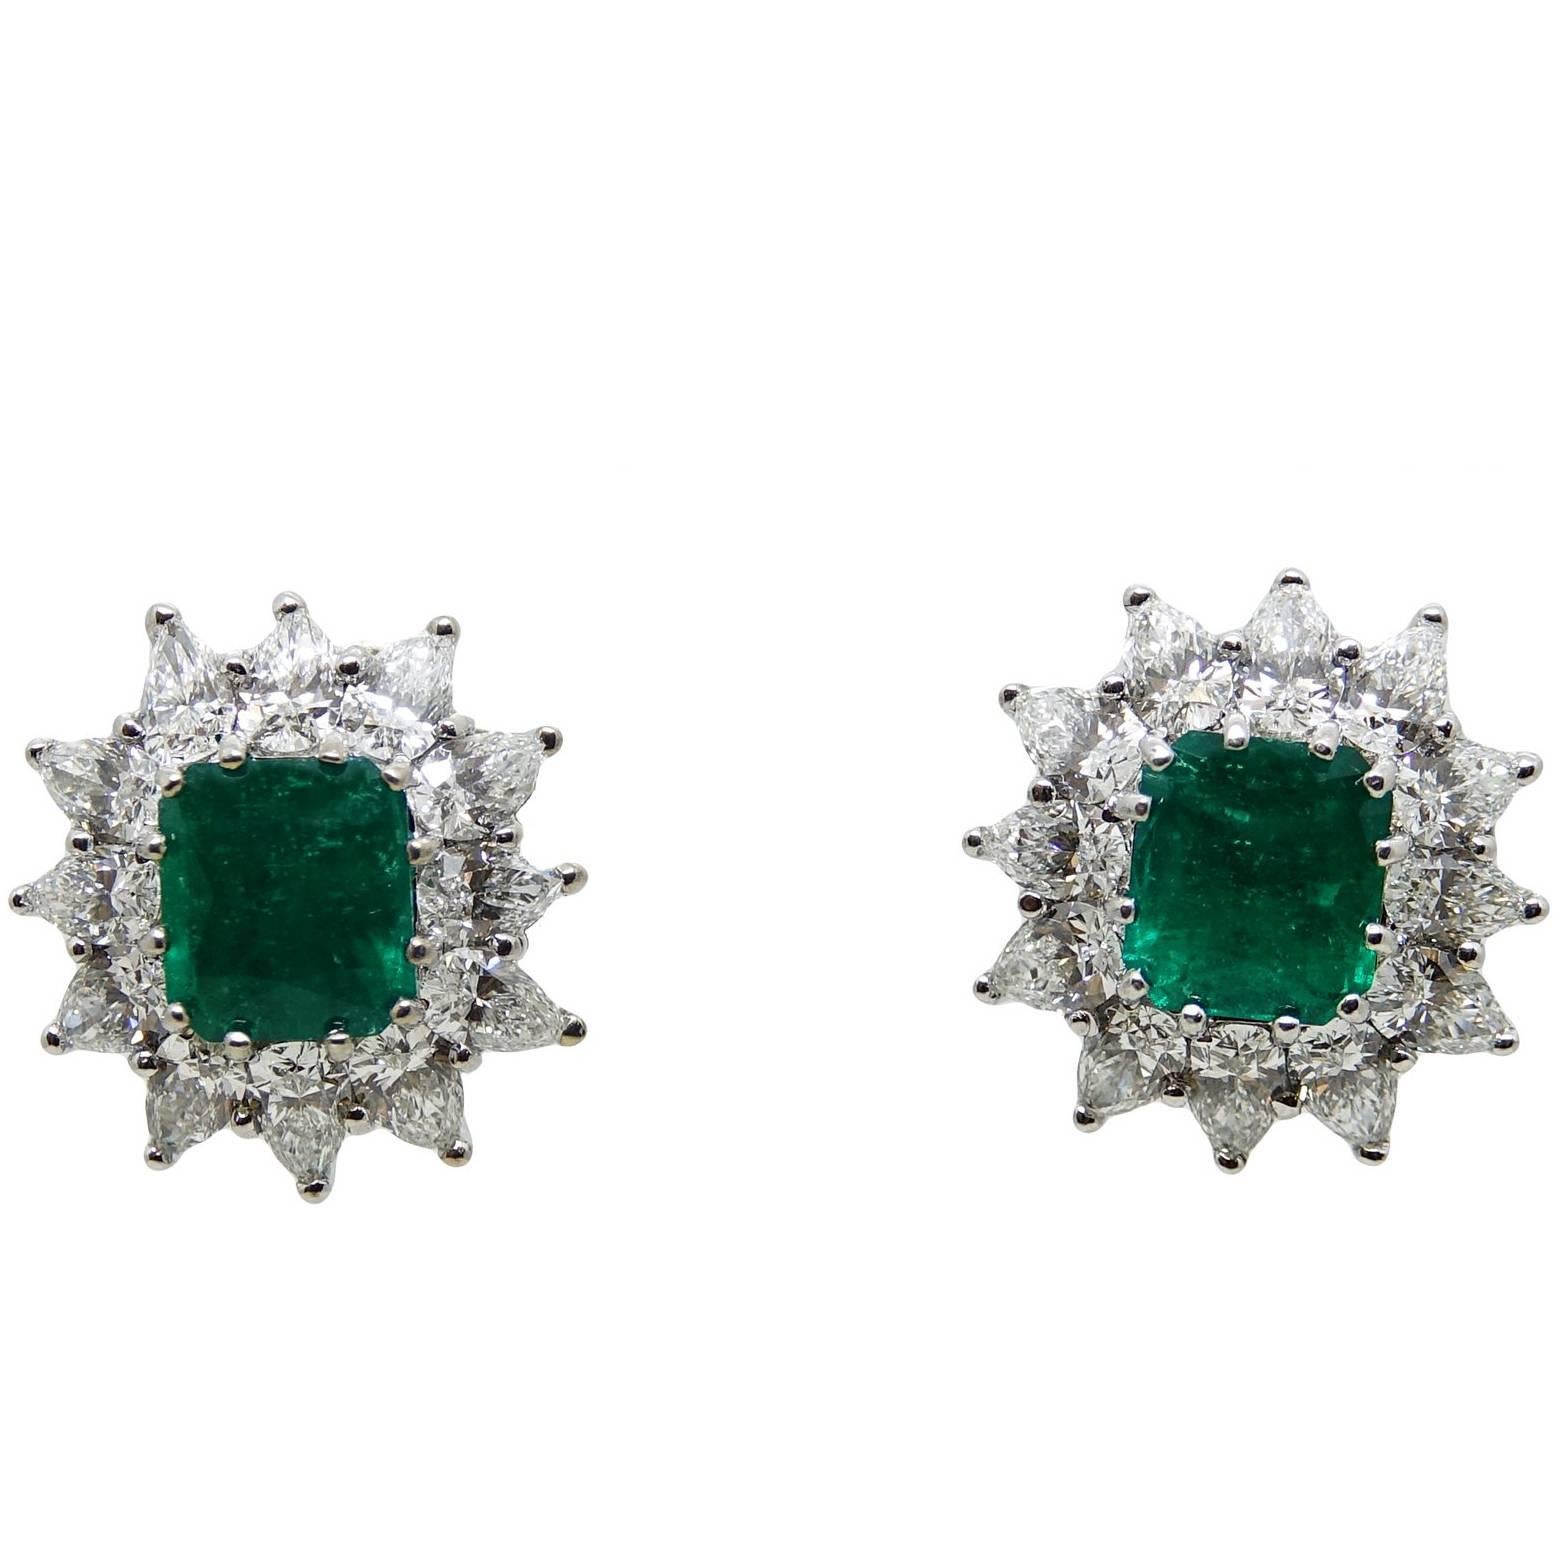 3.34 Carat Colombian Emerald Pear Shaped Diamonds White Gold Earrings For Sale